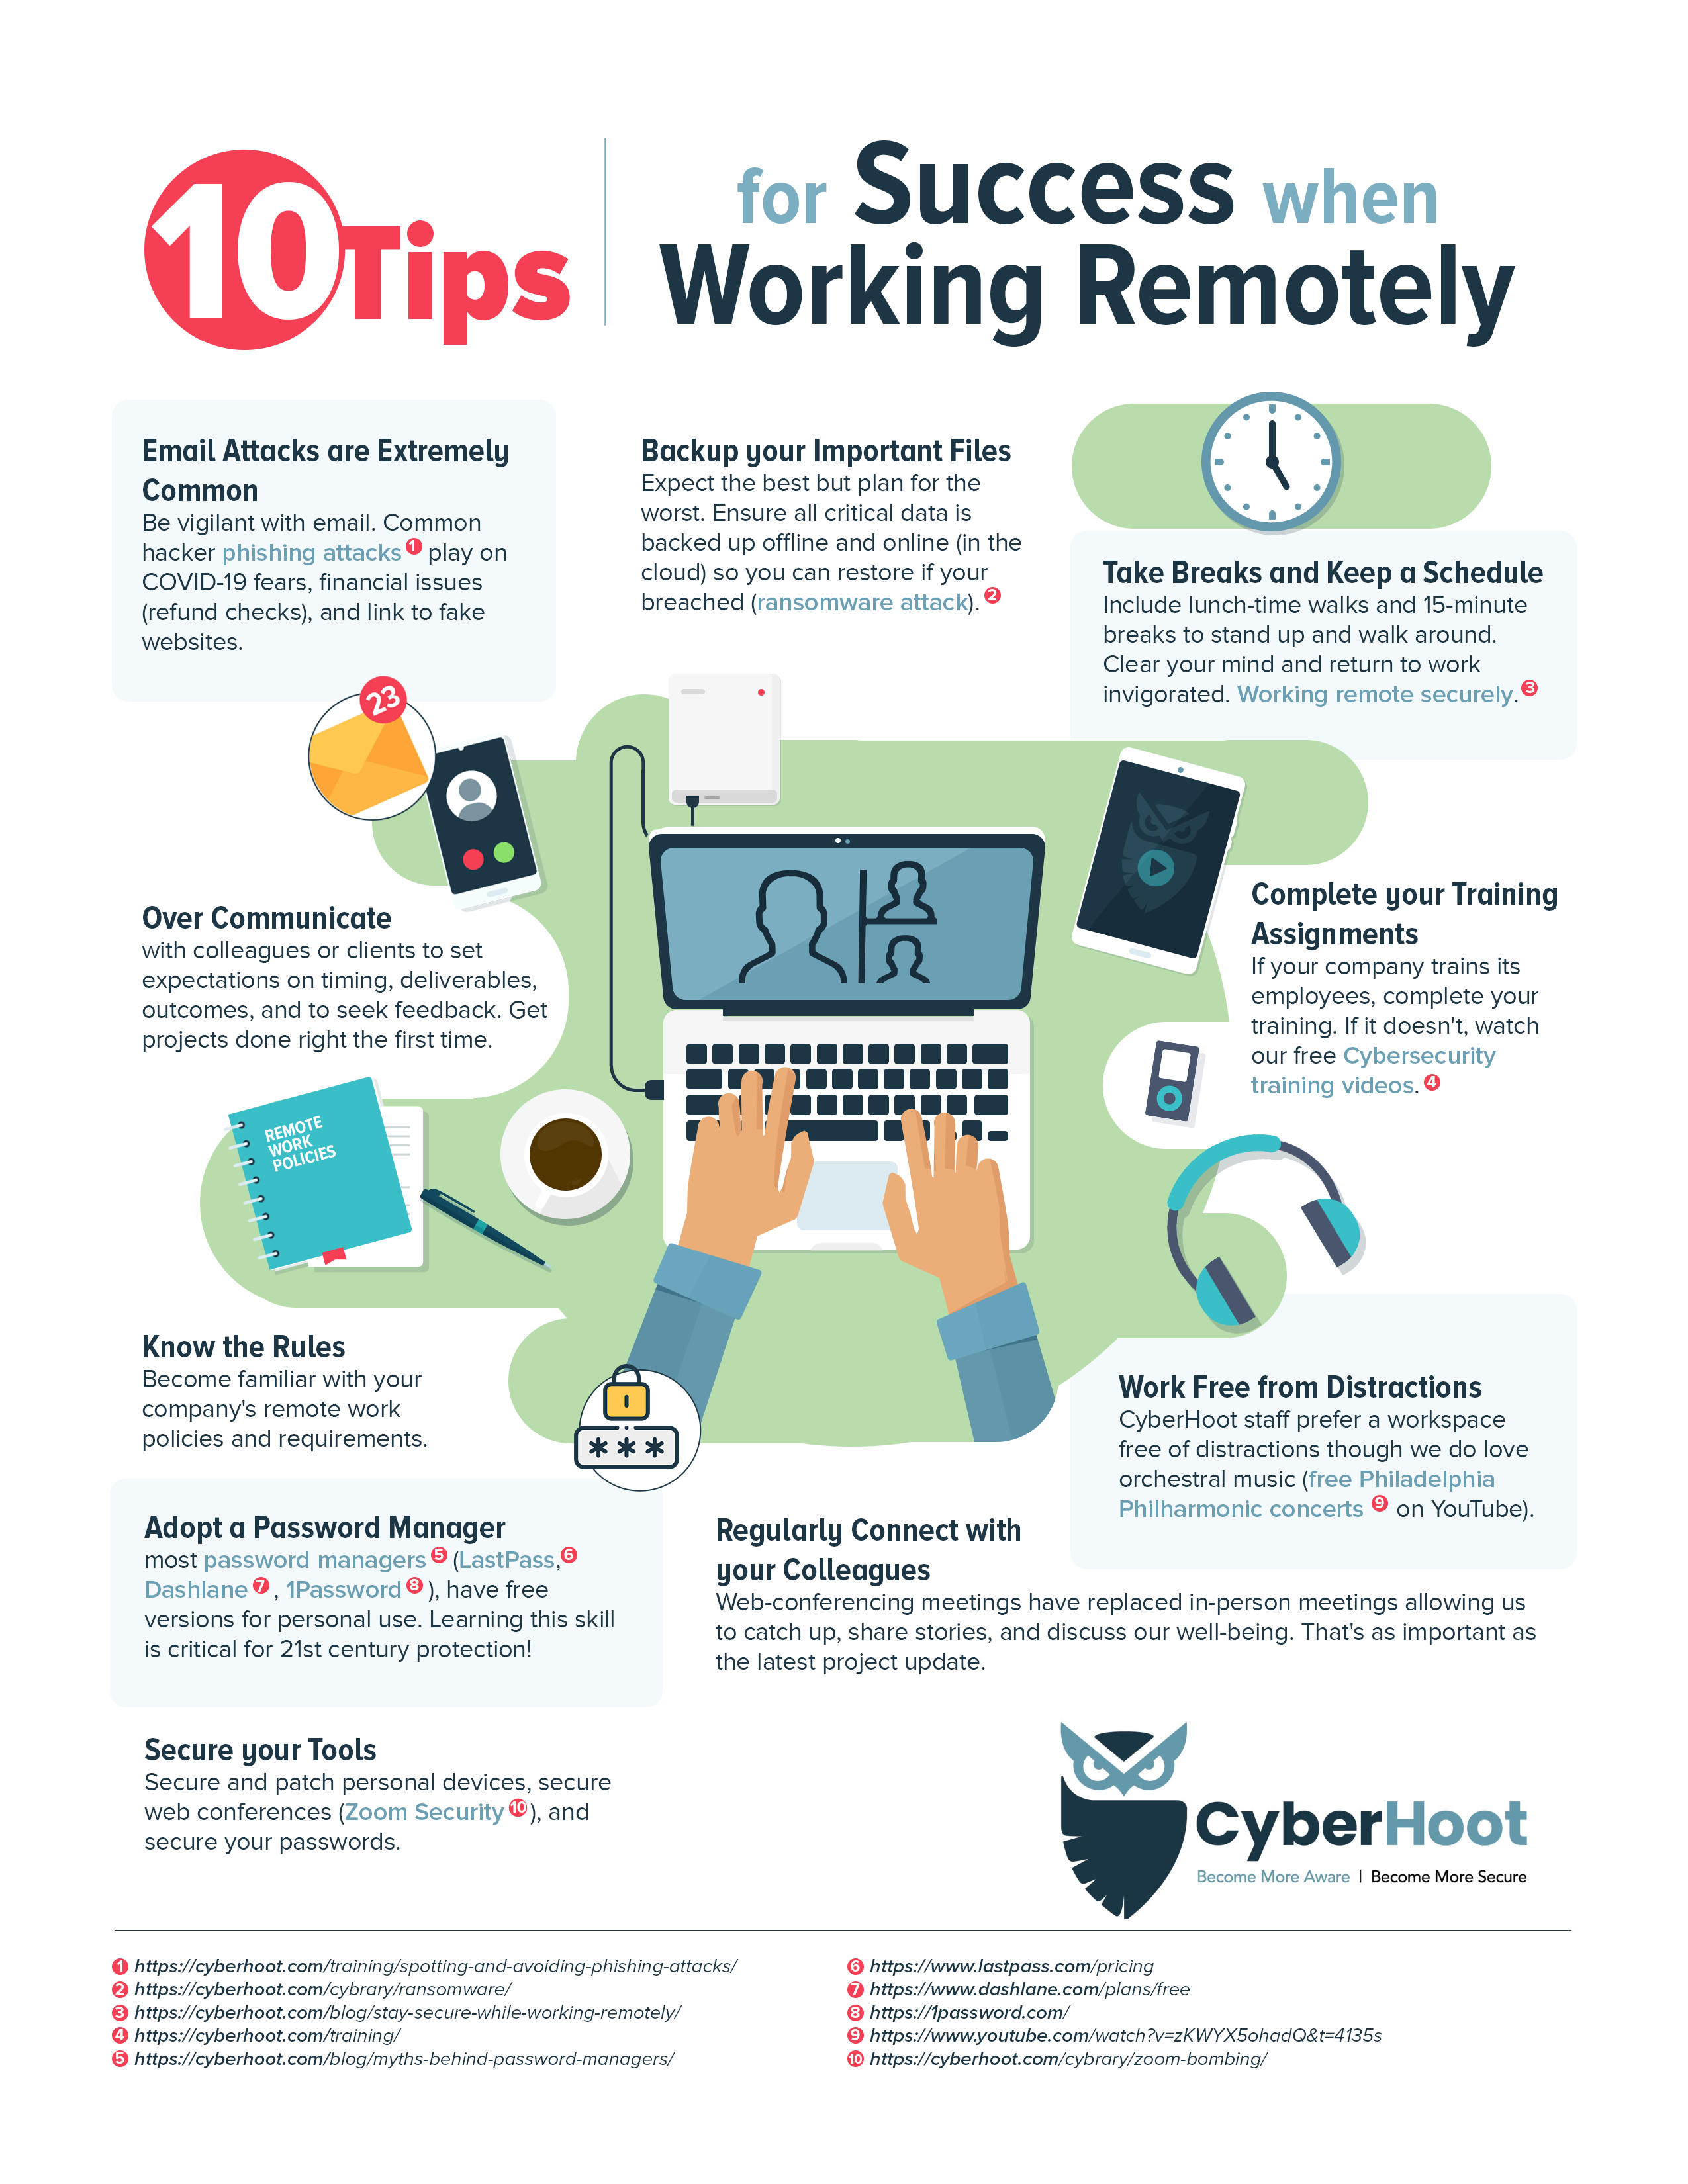 best companies to work remotely